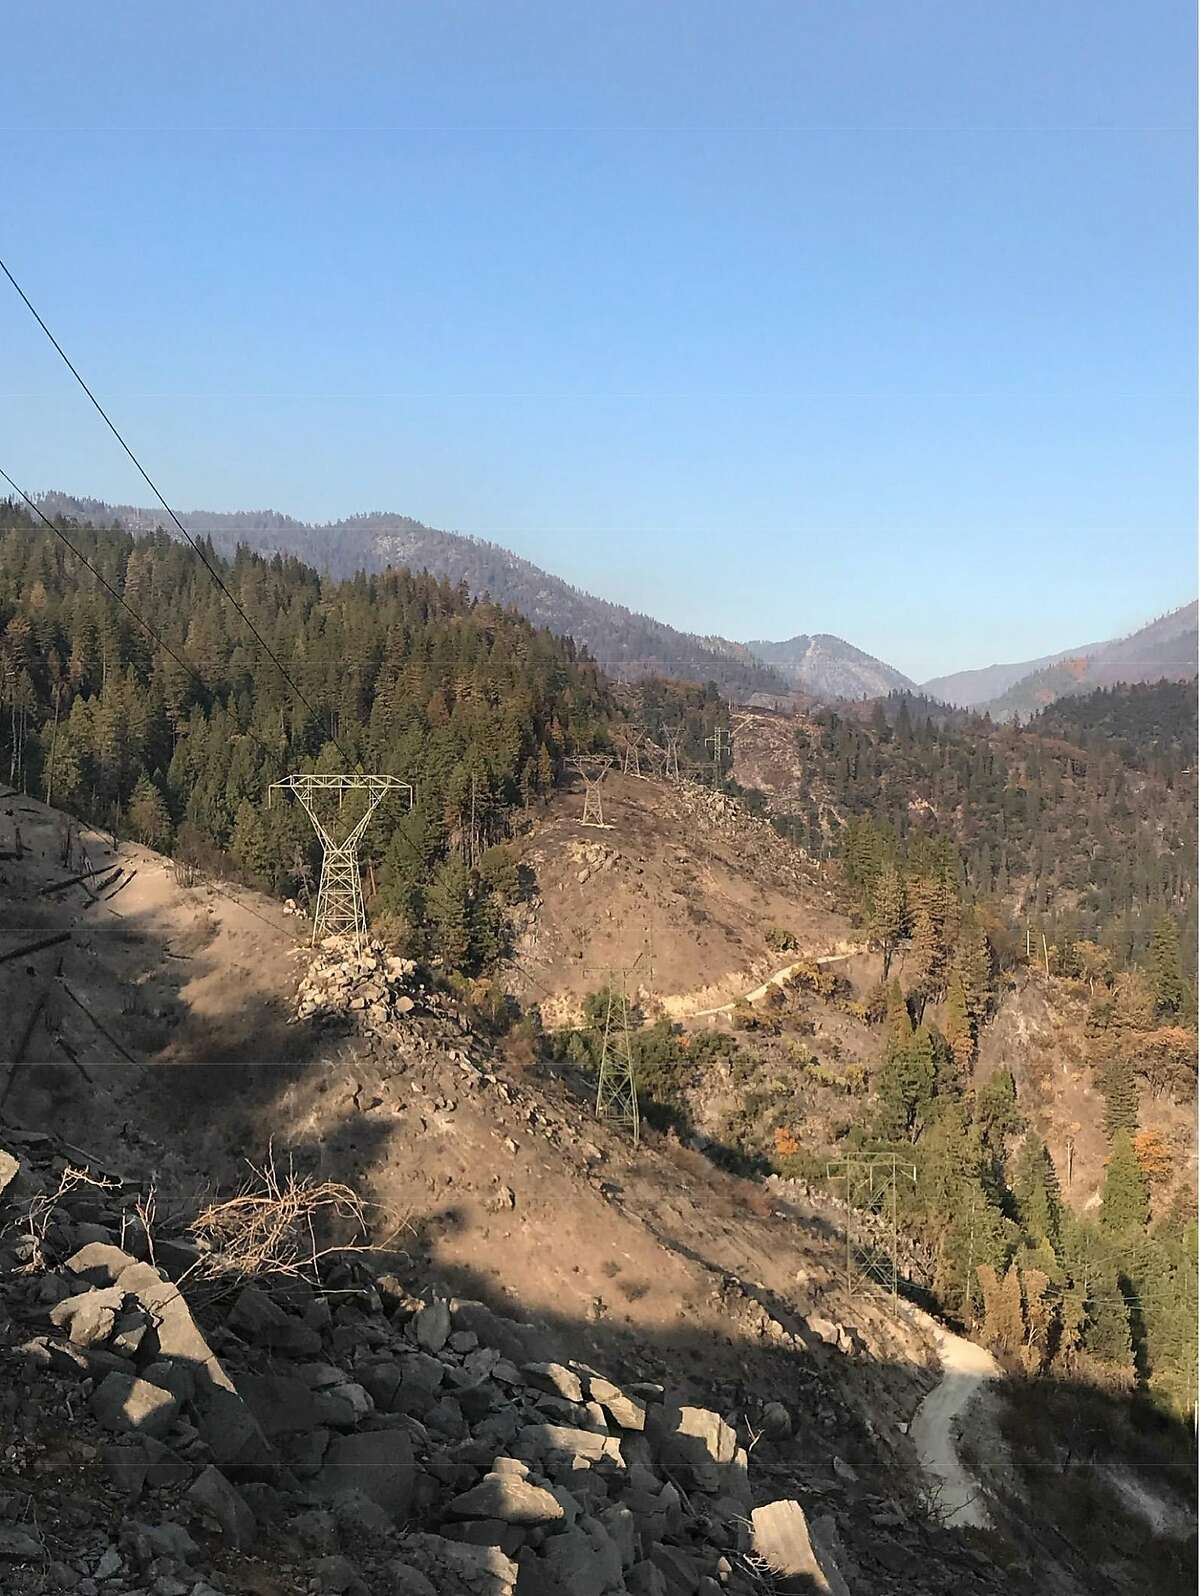 A photograph published in a lawsuit shows the extremely rugged terrain of the PGE Caribou-Palermo circuit taken from the origin site of the Camp Fire looking to the northeast.